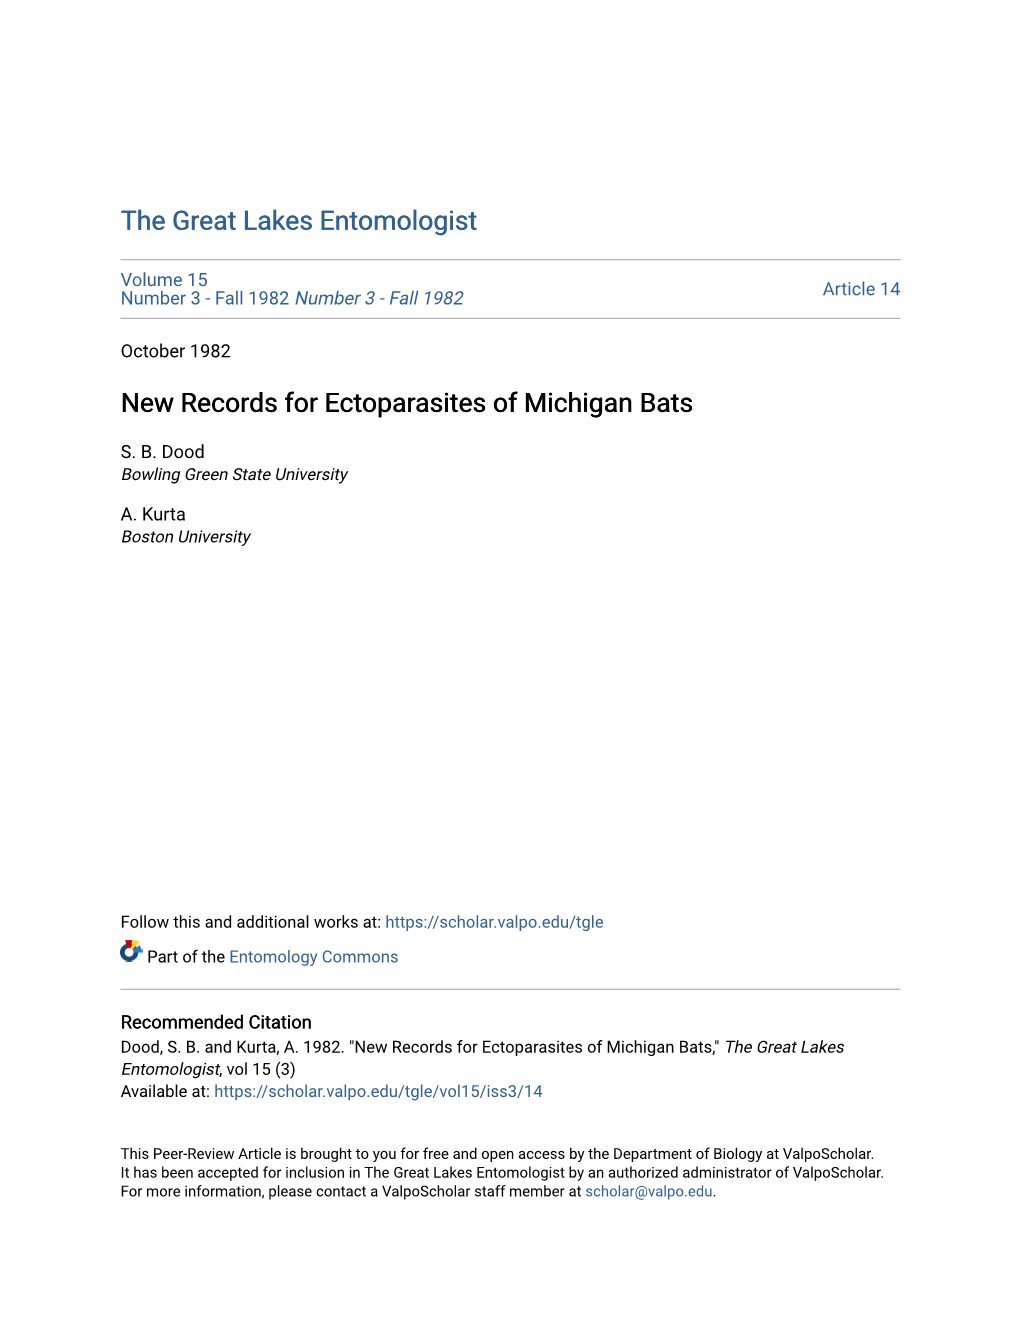 New Records for Ectoparasites of Michigan Bats